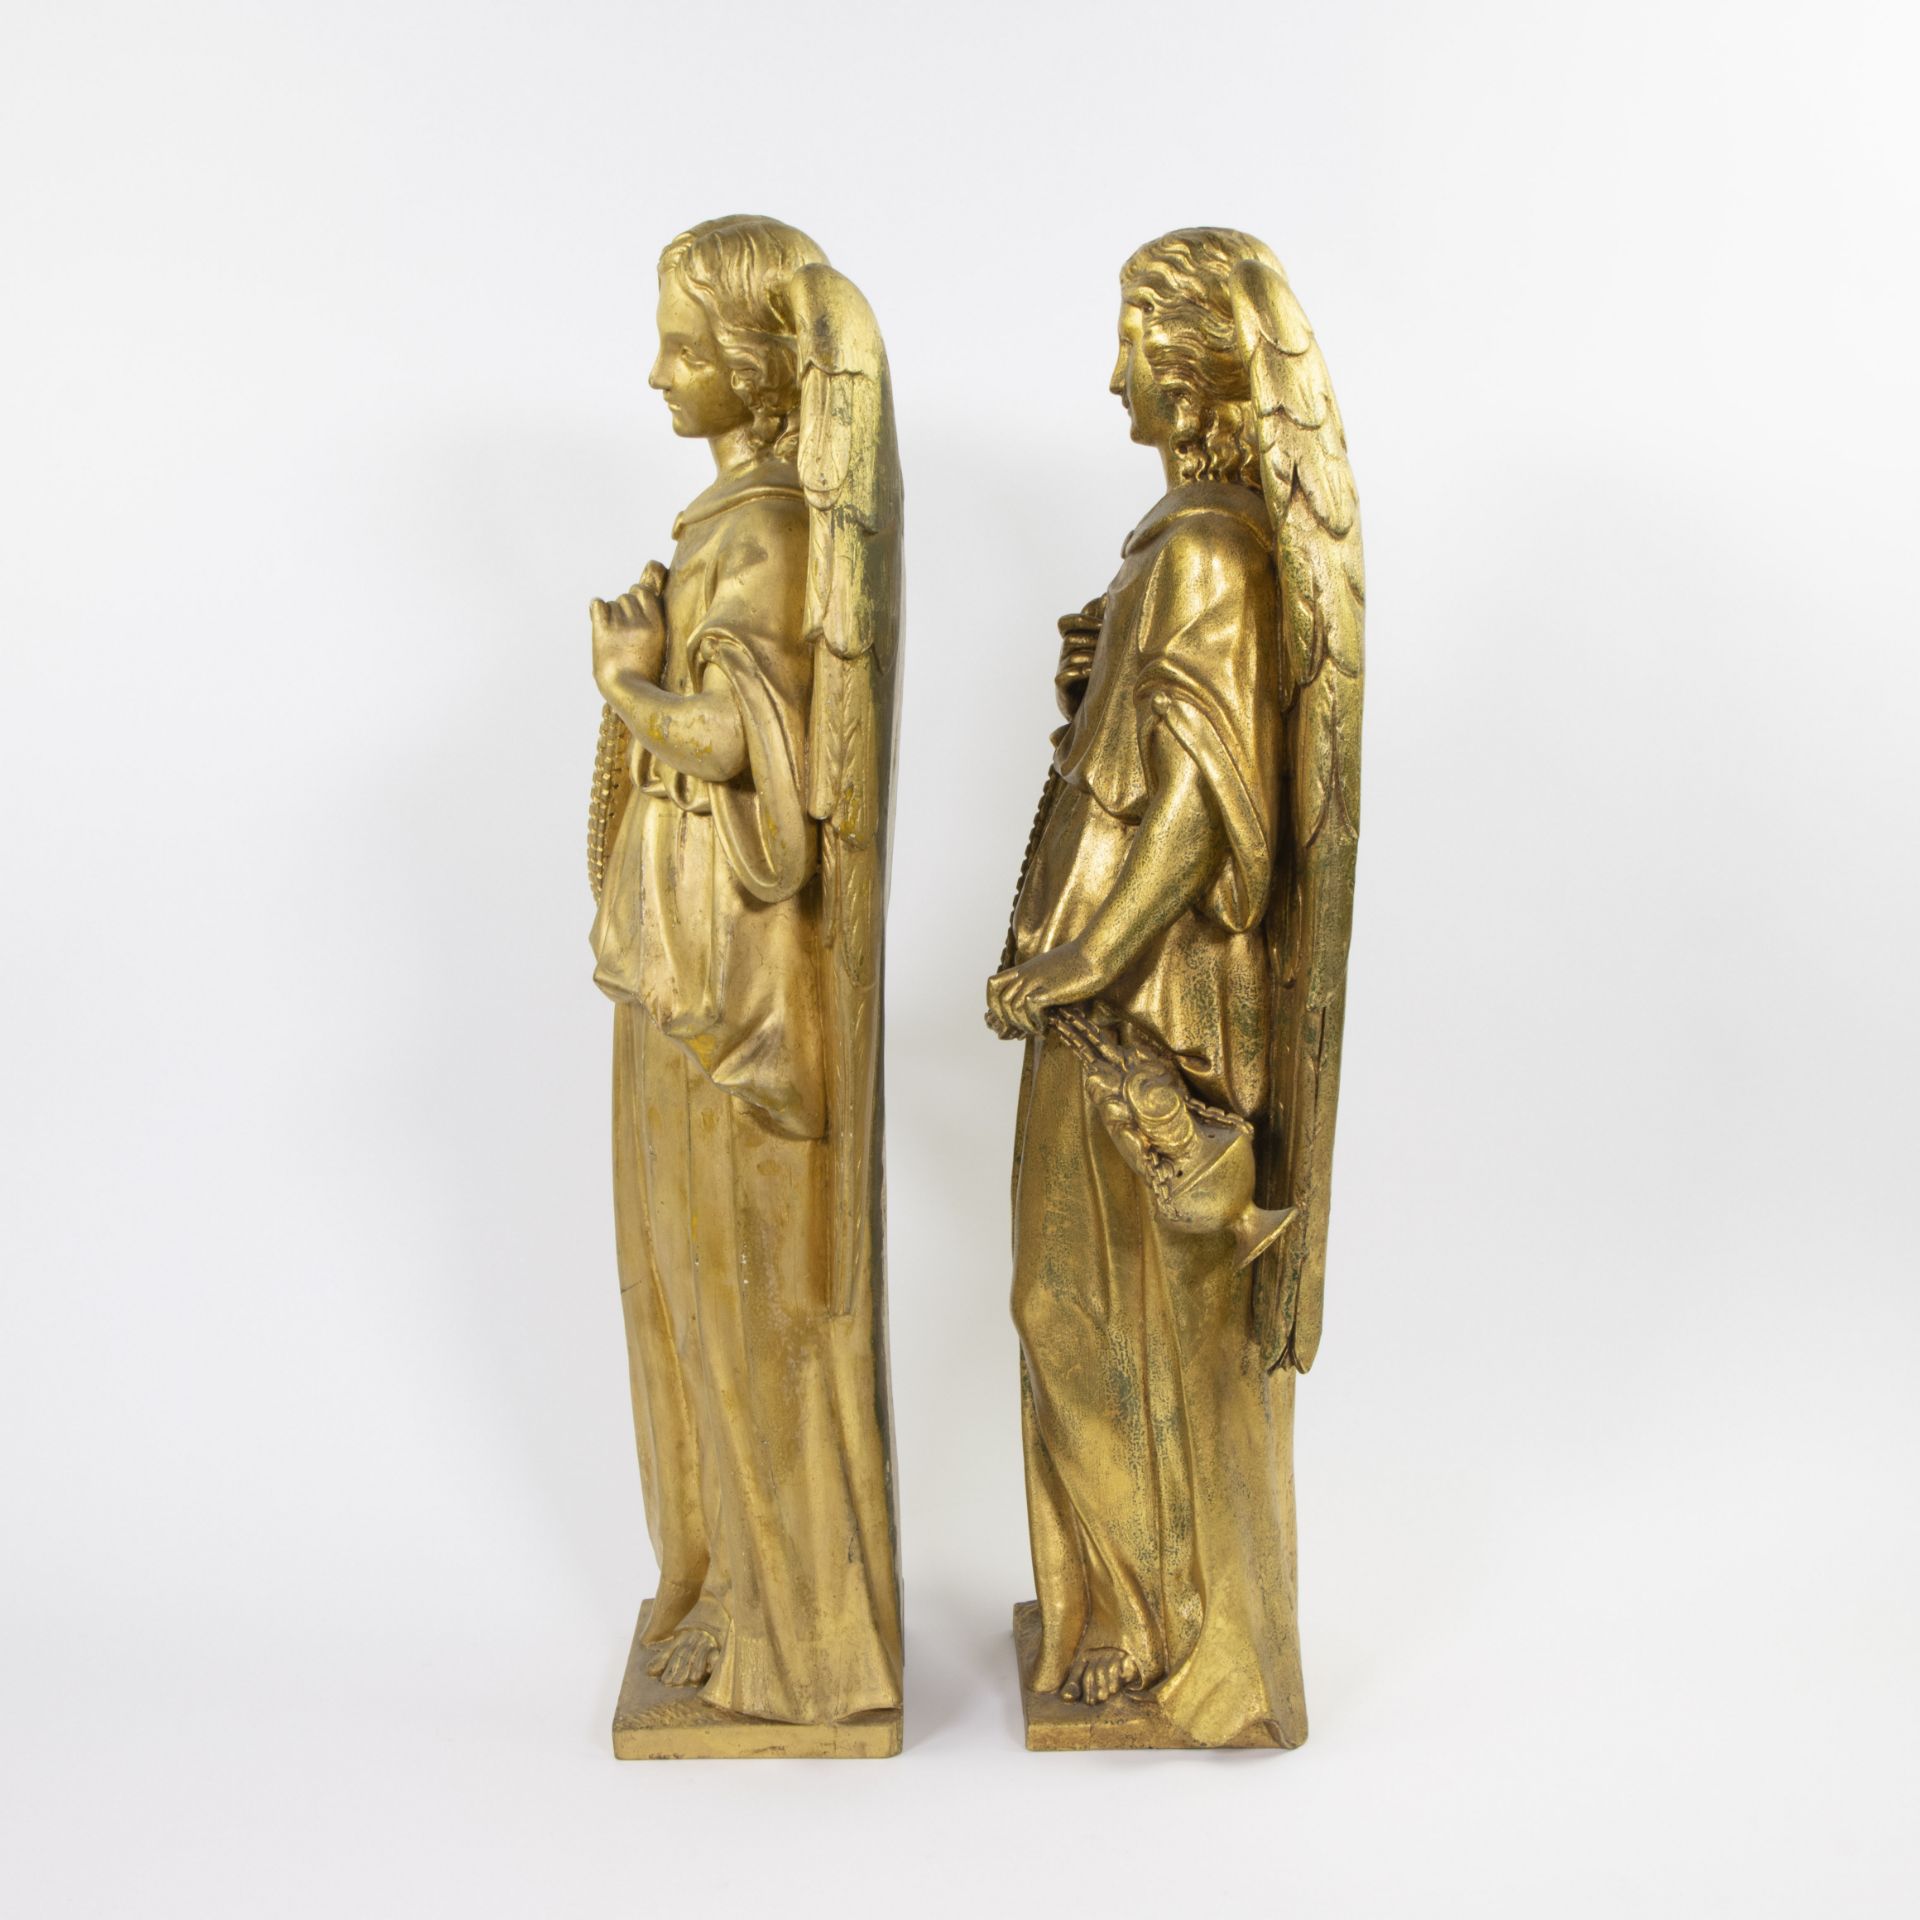 Pair of neo-gothic gilded wooden angels, Flemish, 19th century - Image 2 of 4